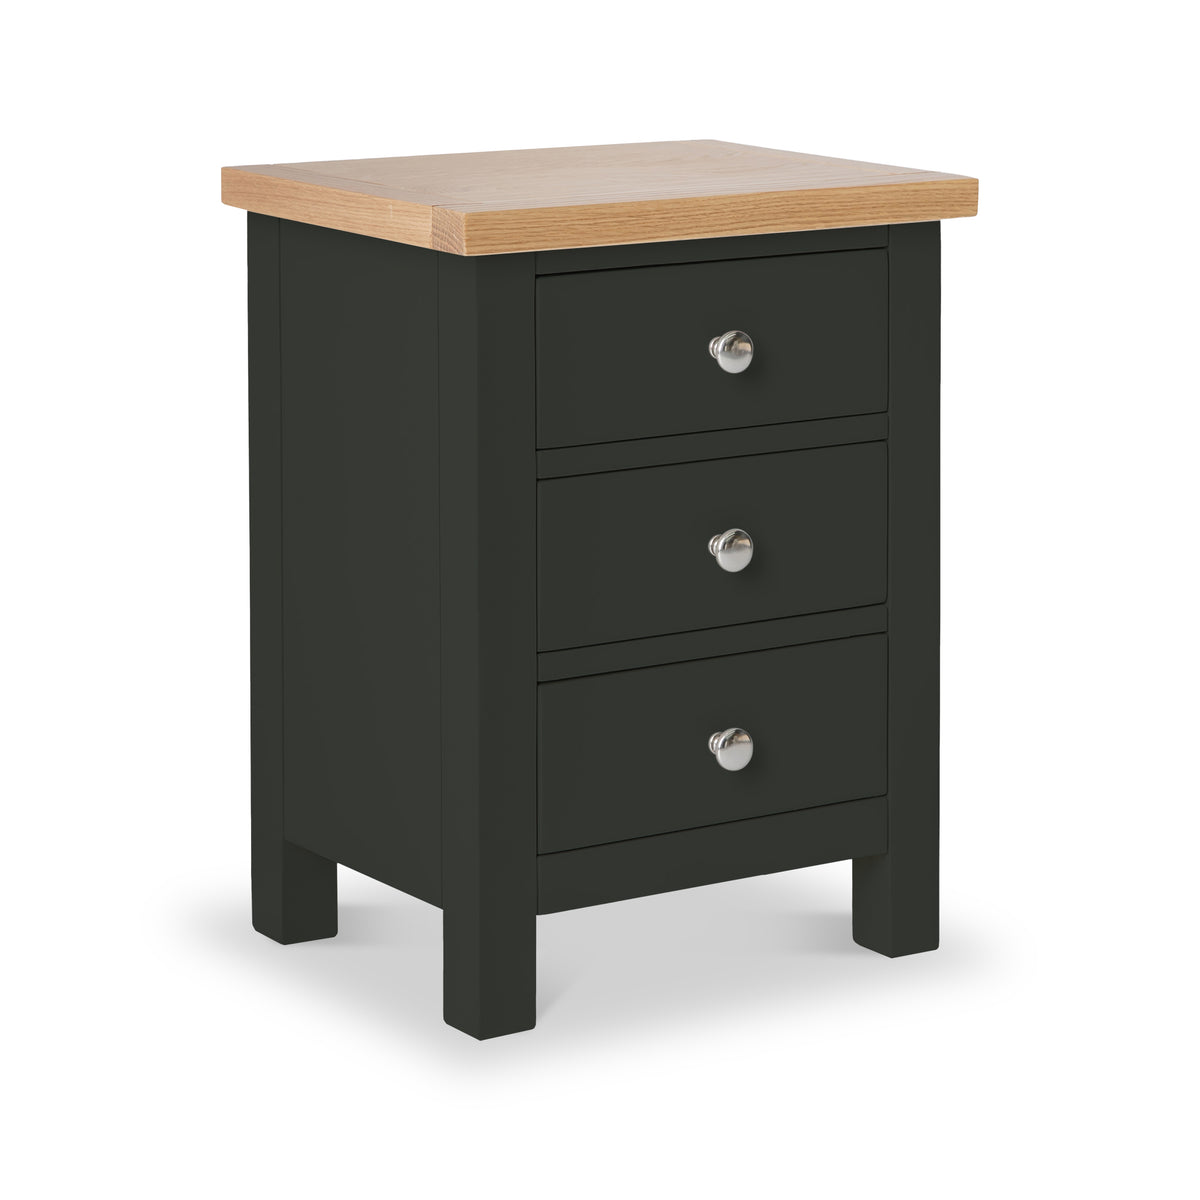 Farrow Smoke 3 Drawer Bedside Table from Roseland Furniture